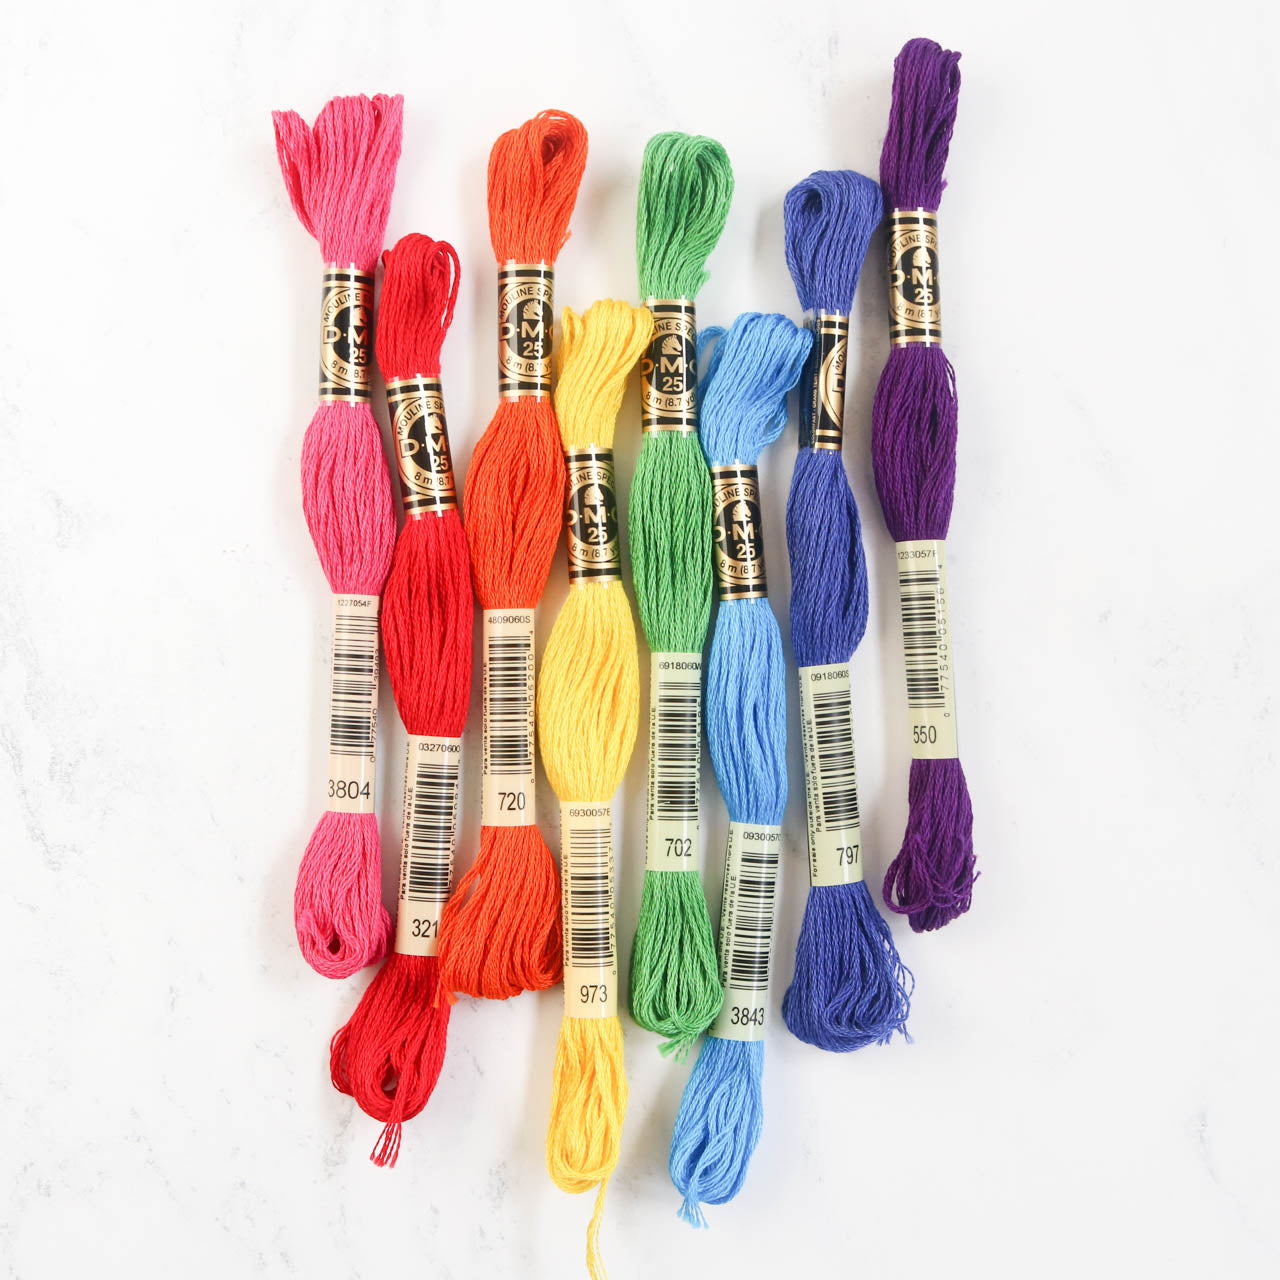 Embroidery Floss Set, Rainbow Palette - Seven 8.75 yard skeins